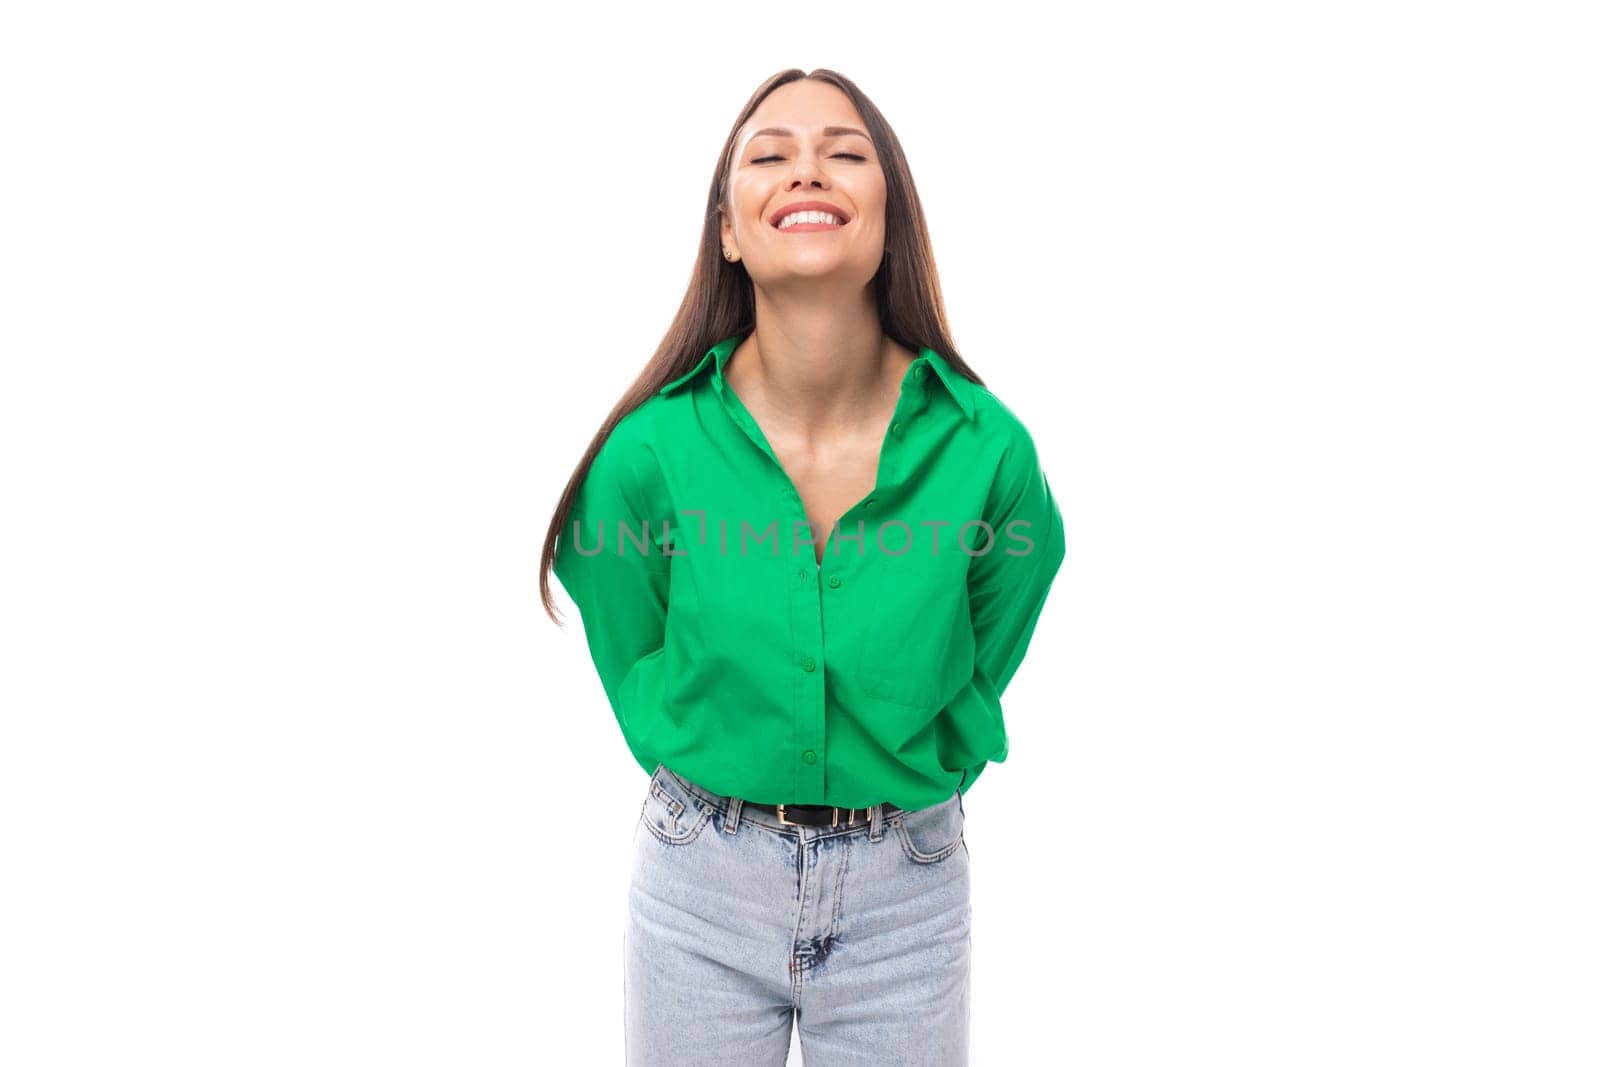 brown-eyed brunette young business lady in a green shirt on a white background with copy space.